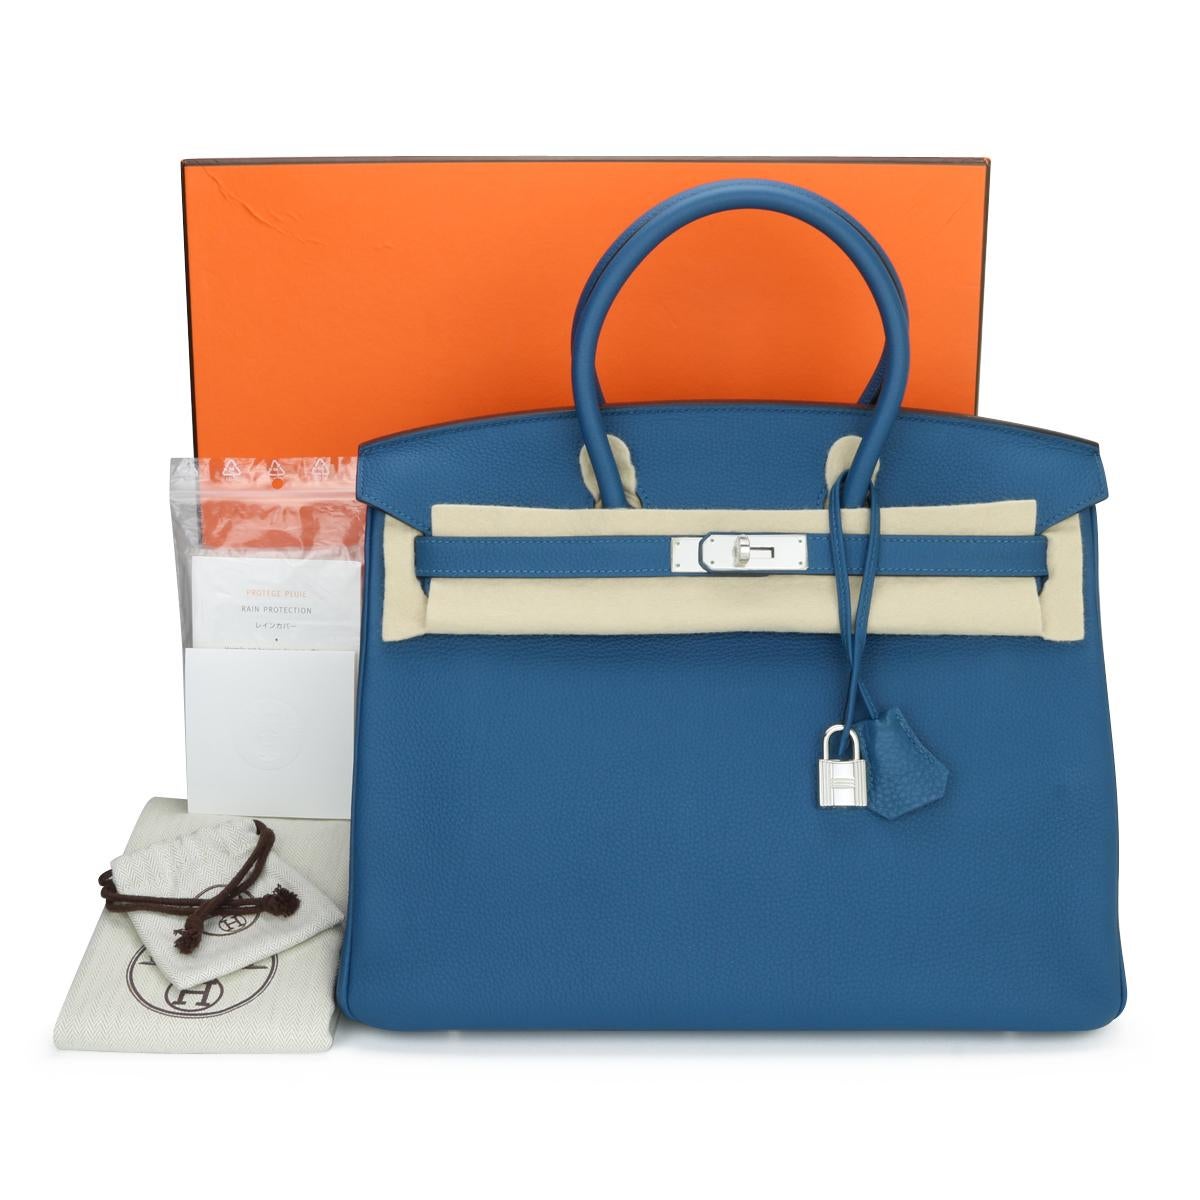 Hermès Birkin Bag 35cm Bleu de Galice Togo Leather with Palladium Hardware Stamp Q_Year 2013.

This bag is still in never worn condition. The leather still smells fresh as when new, and it still holds to the original shape. The hardware is still